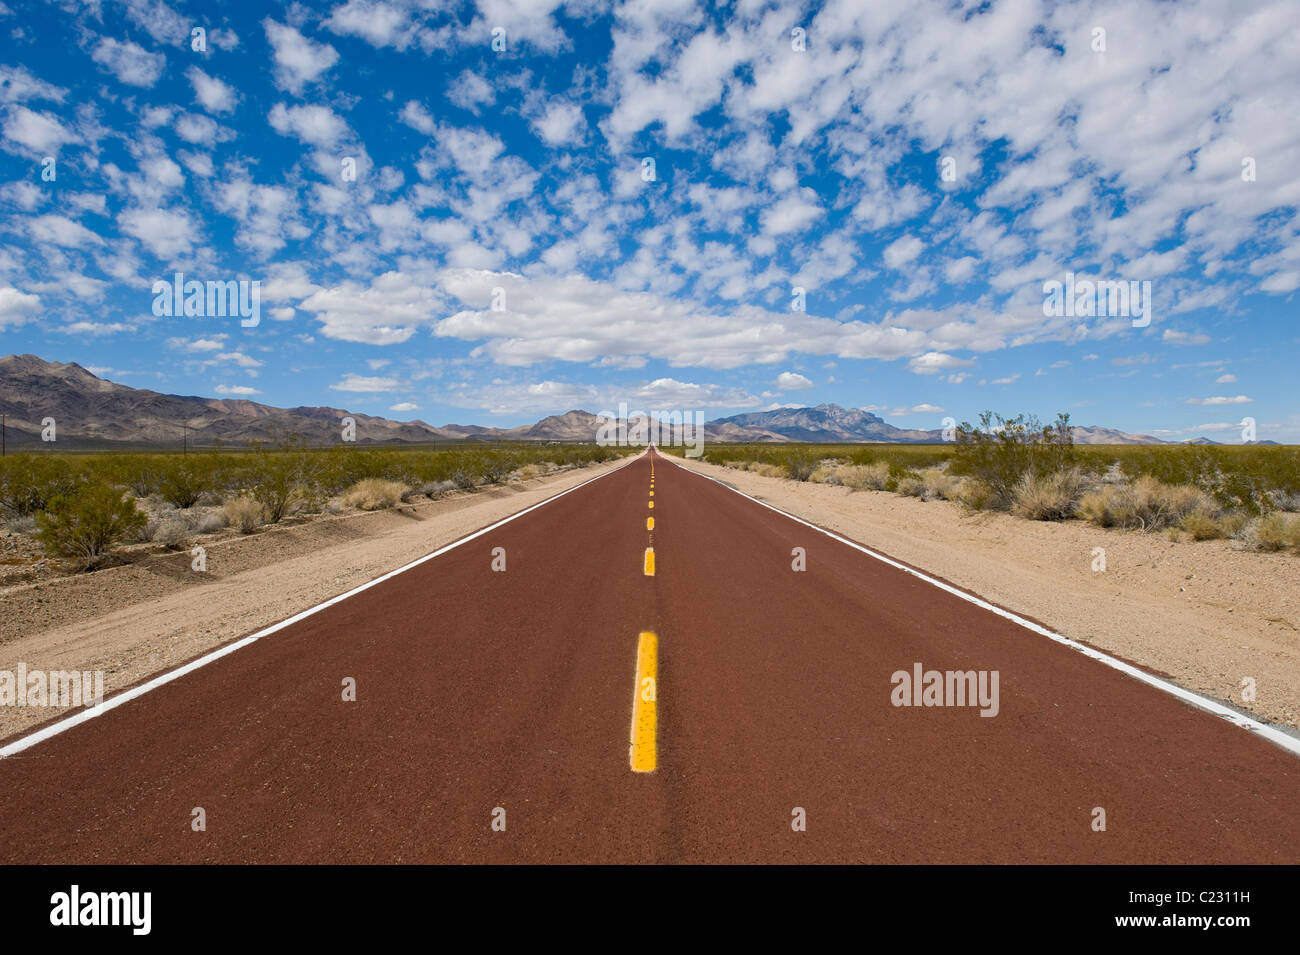 View from the middle of a straight road running through deserted land Stock Photo